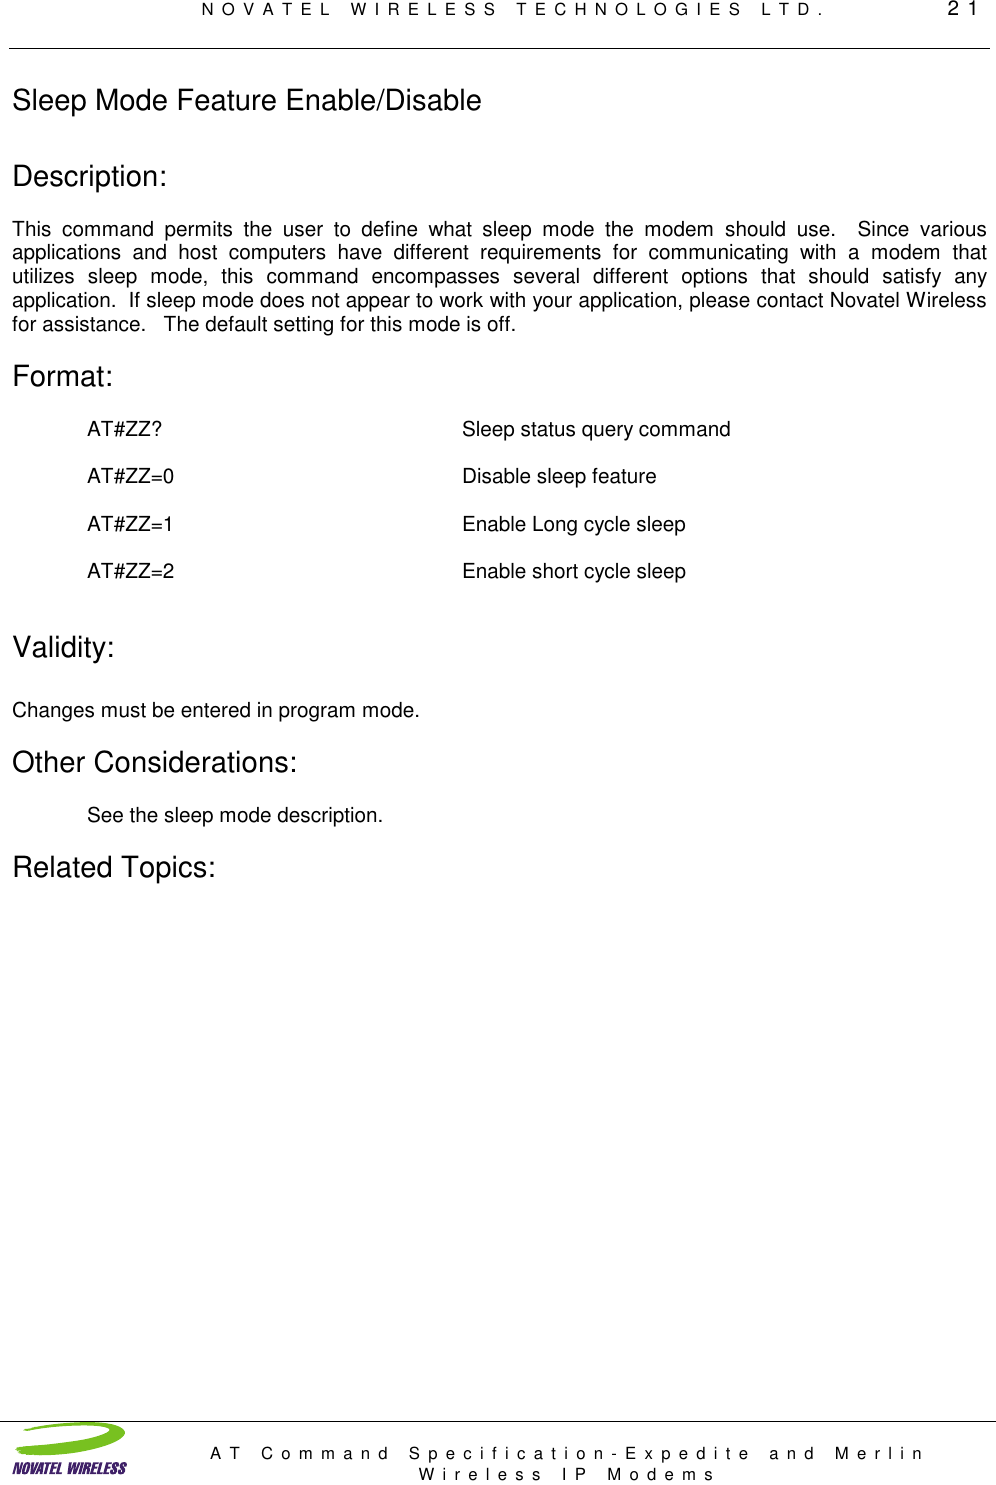 NOVATEL WIRELESS TECHNOLOGIES LTD.         21AT Command Specification-Expedite and MerlinWireless IP ModemsSleep Mode Feature Enable/DisableDescription:This command permits the user to define what sleep mode the modem should use.  Since variousapplications and host computers have different requirements for communicating with a modem thatutilizes sleep mode, this command encompasses several different options that should satisfy anyapplication.  If sleep mode does not appear to work with your application, please contact Novatel Wirelessfor assistance.   The default setting for this mode is off.Format:AT#ZZ? Sleep status query commandAT#ZZ=0 Disable sleep featureAT#ZZ=1 Enable Long cycle sleepAT#ZZ=2 Enable short cycle sleepValidity:Changes must be entered in program mode.Other Considerations:See the sleep mode description.Related Topics: